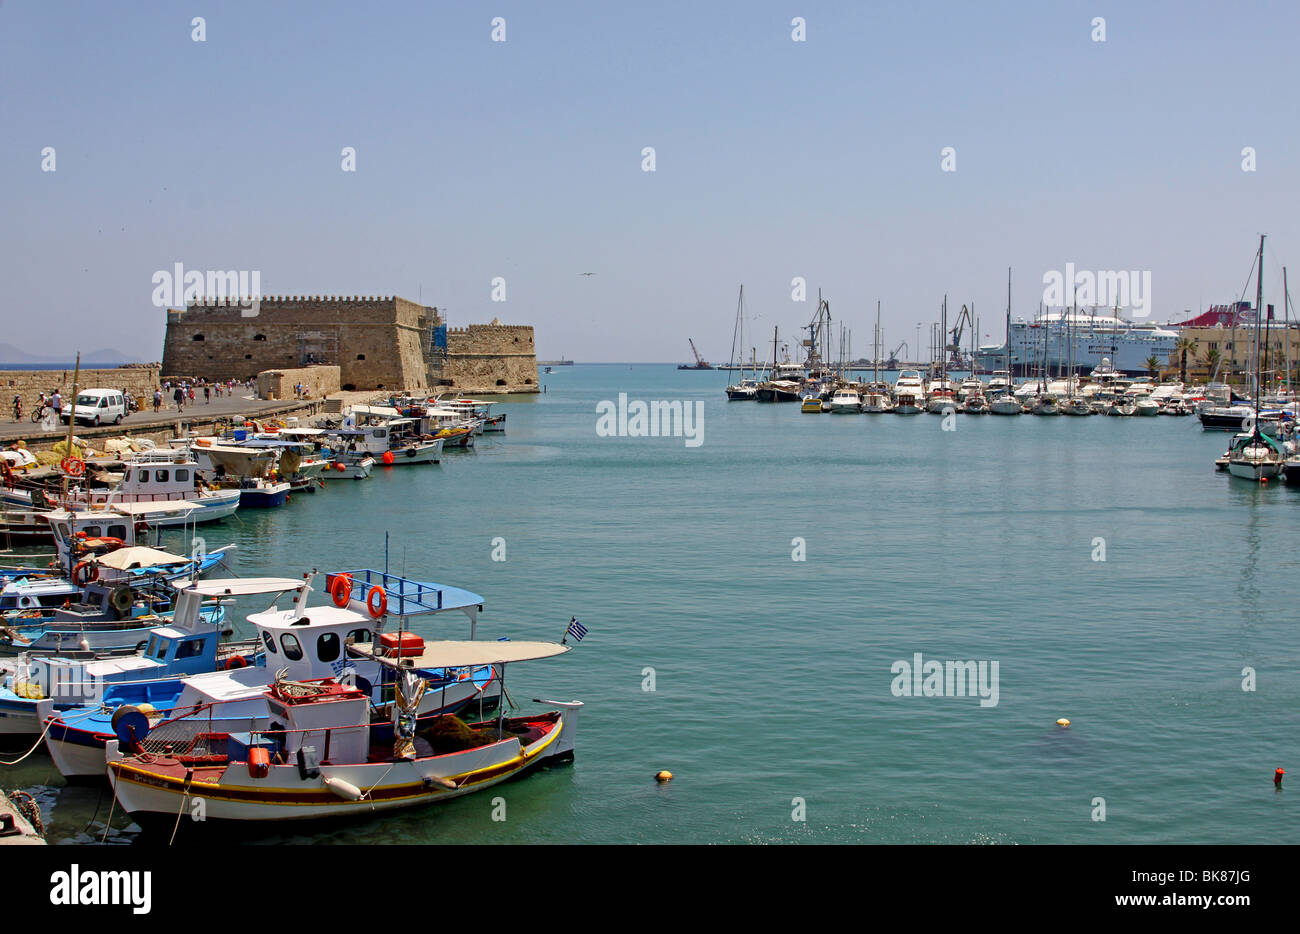 Koules Castle, Venetian harbour, yachts and fishing boats, Heraklion or Iraklion, Crete, Greece, Europe Stock Photo